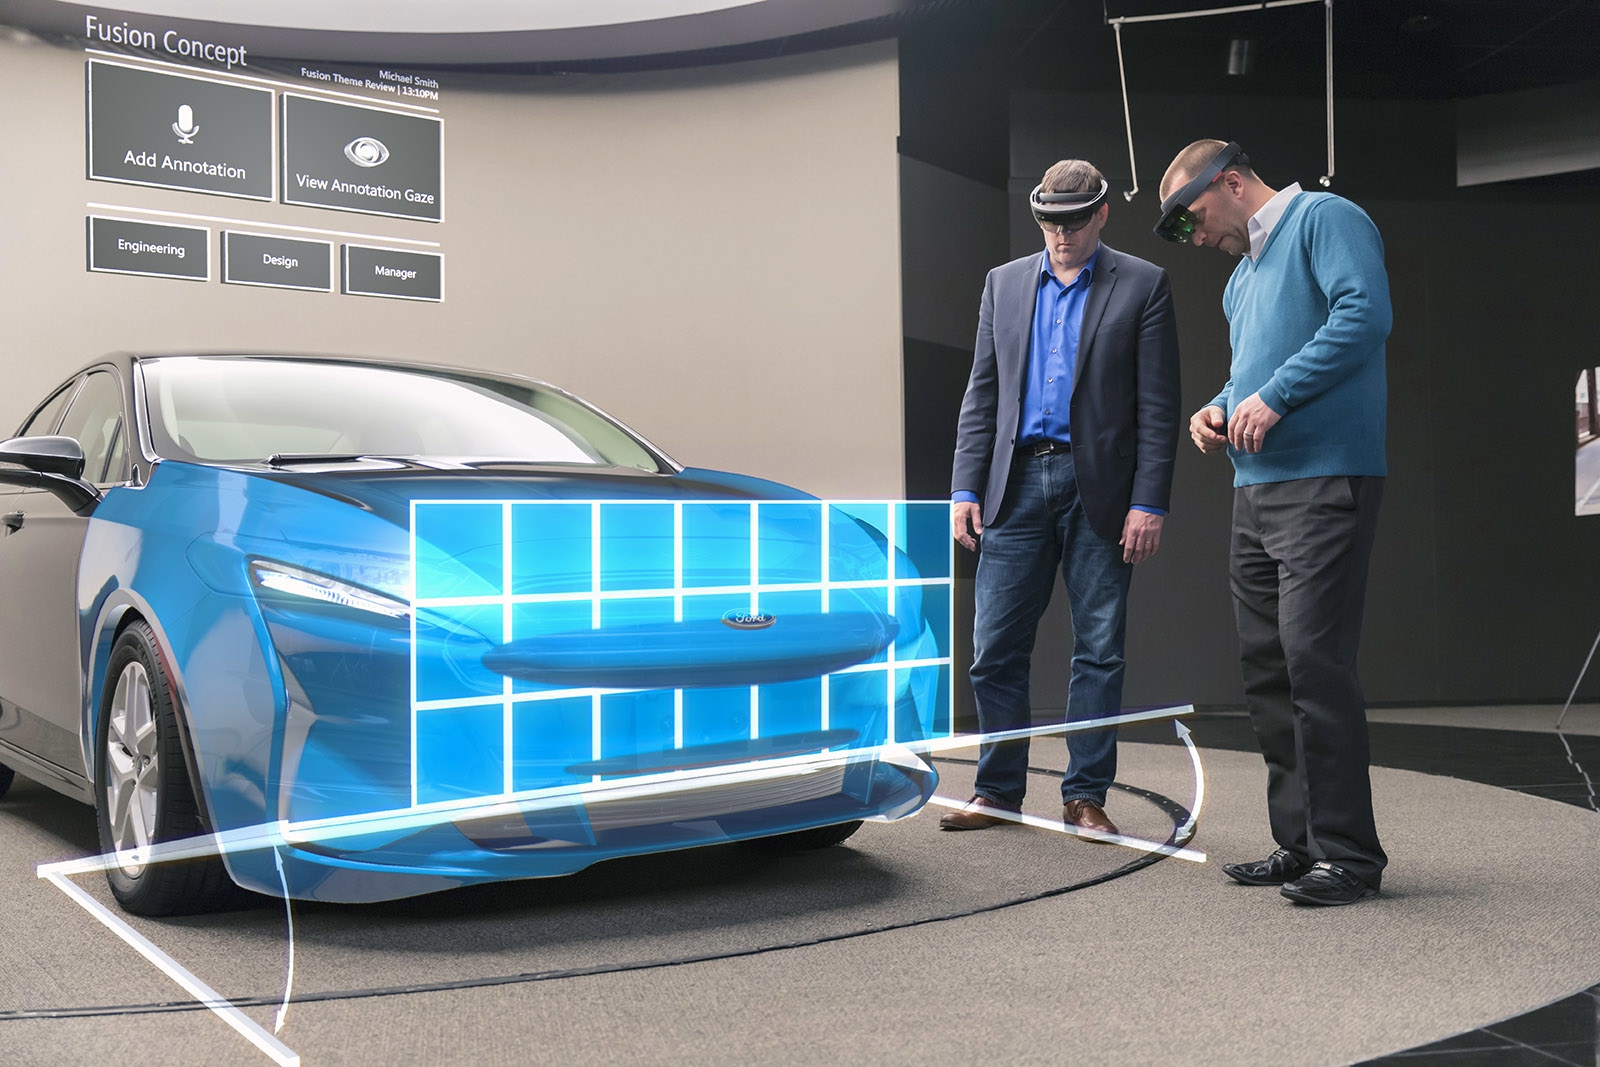 Hololens is helping Ford designers prototype cars quicker | DeviceDaily.com